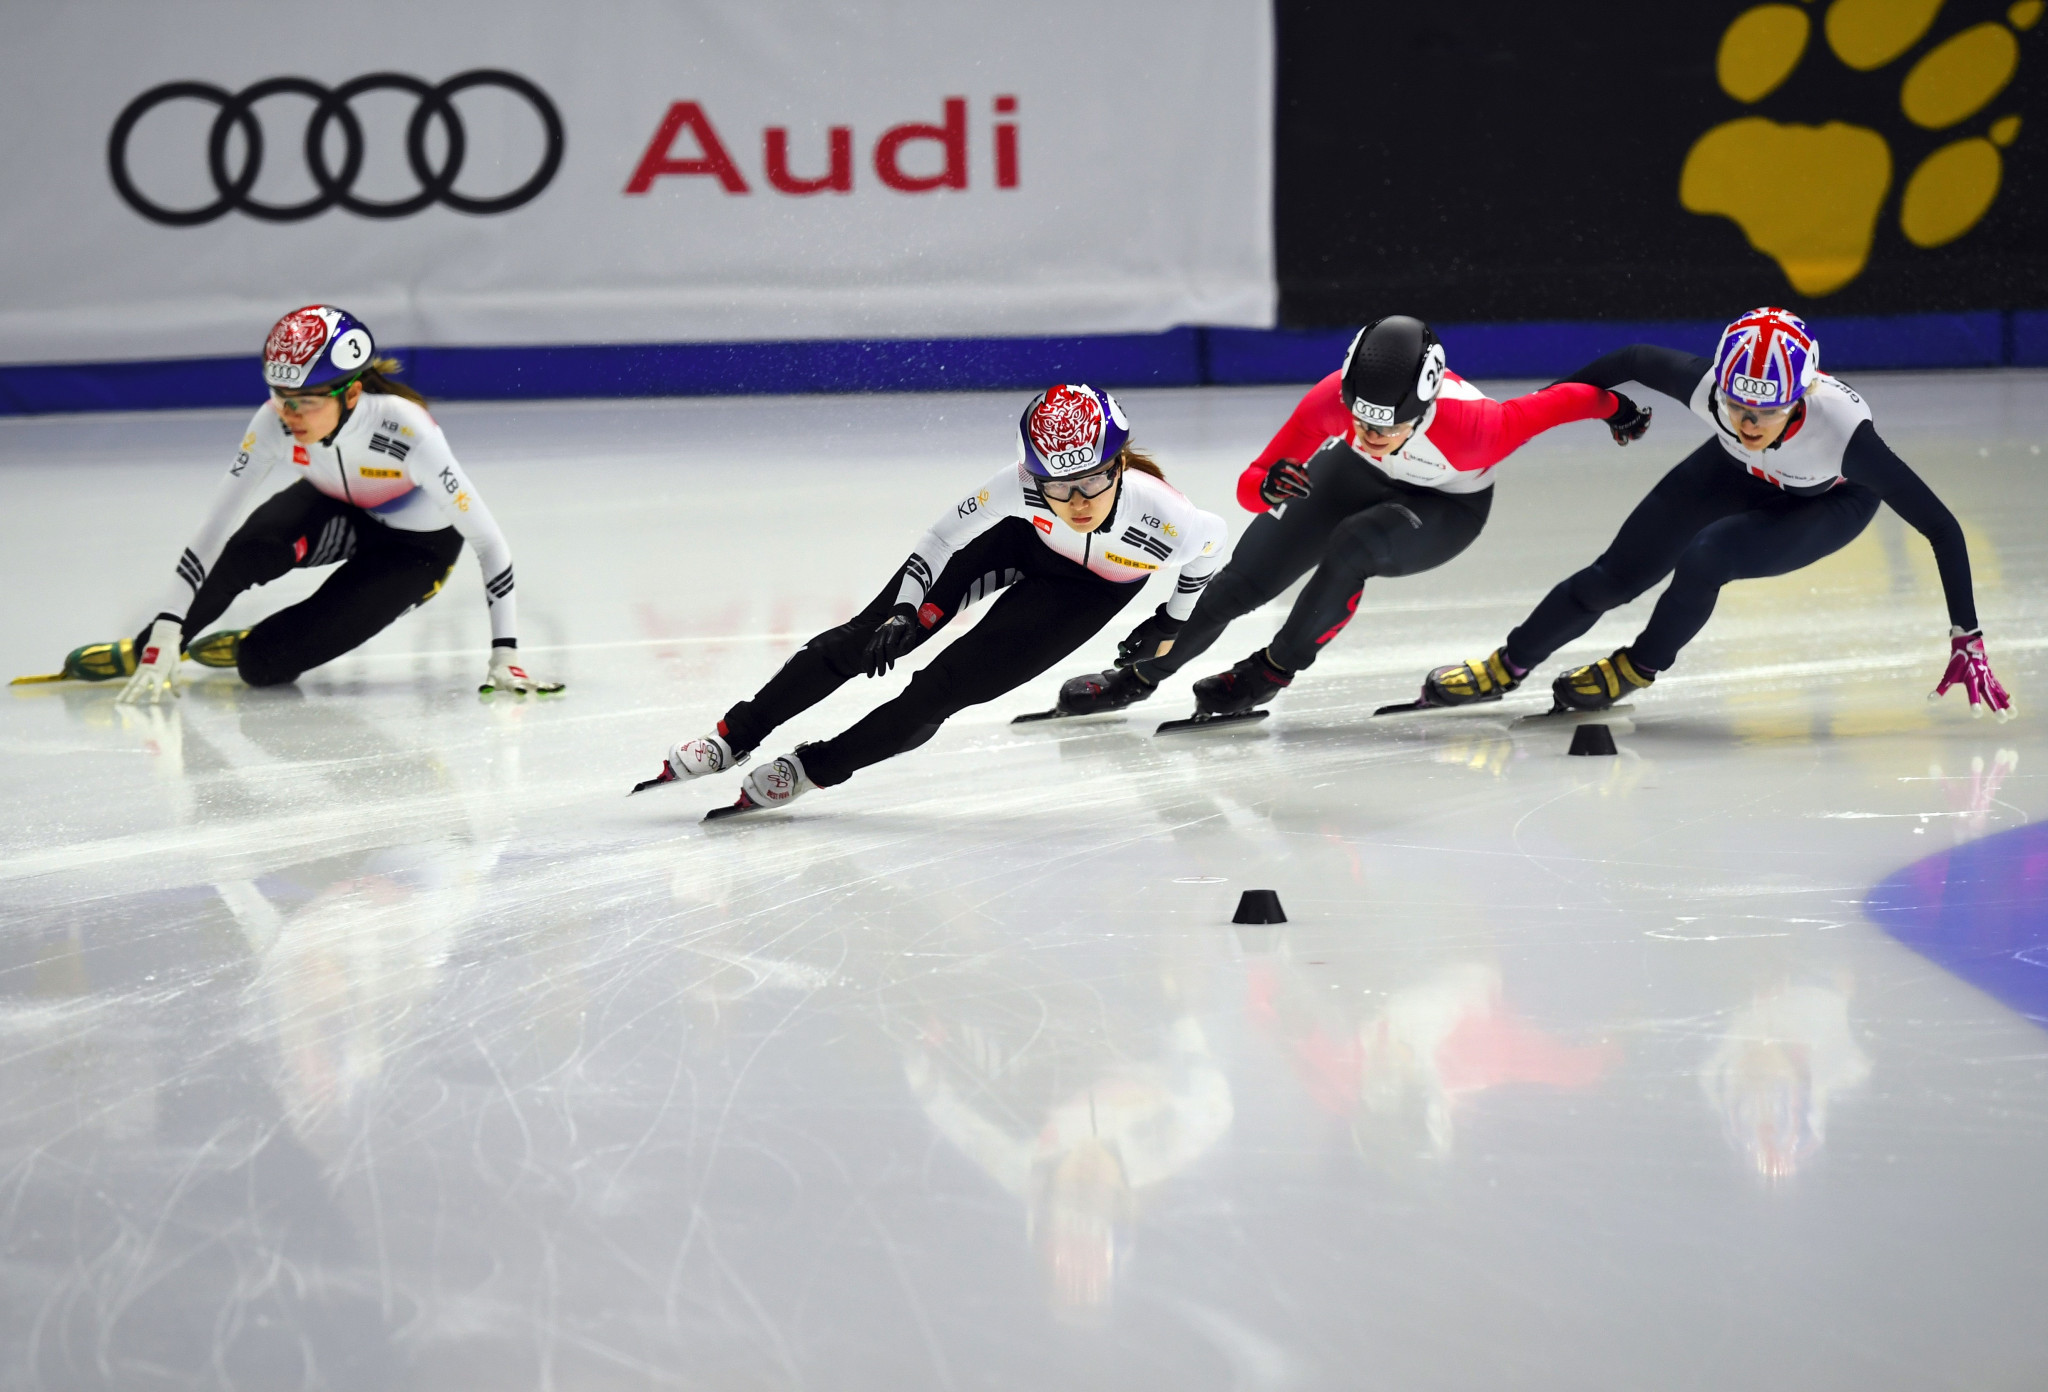 The 2019-2020 ISU Short Track World Cup season runs from November to February ©Getty Images